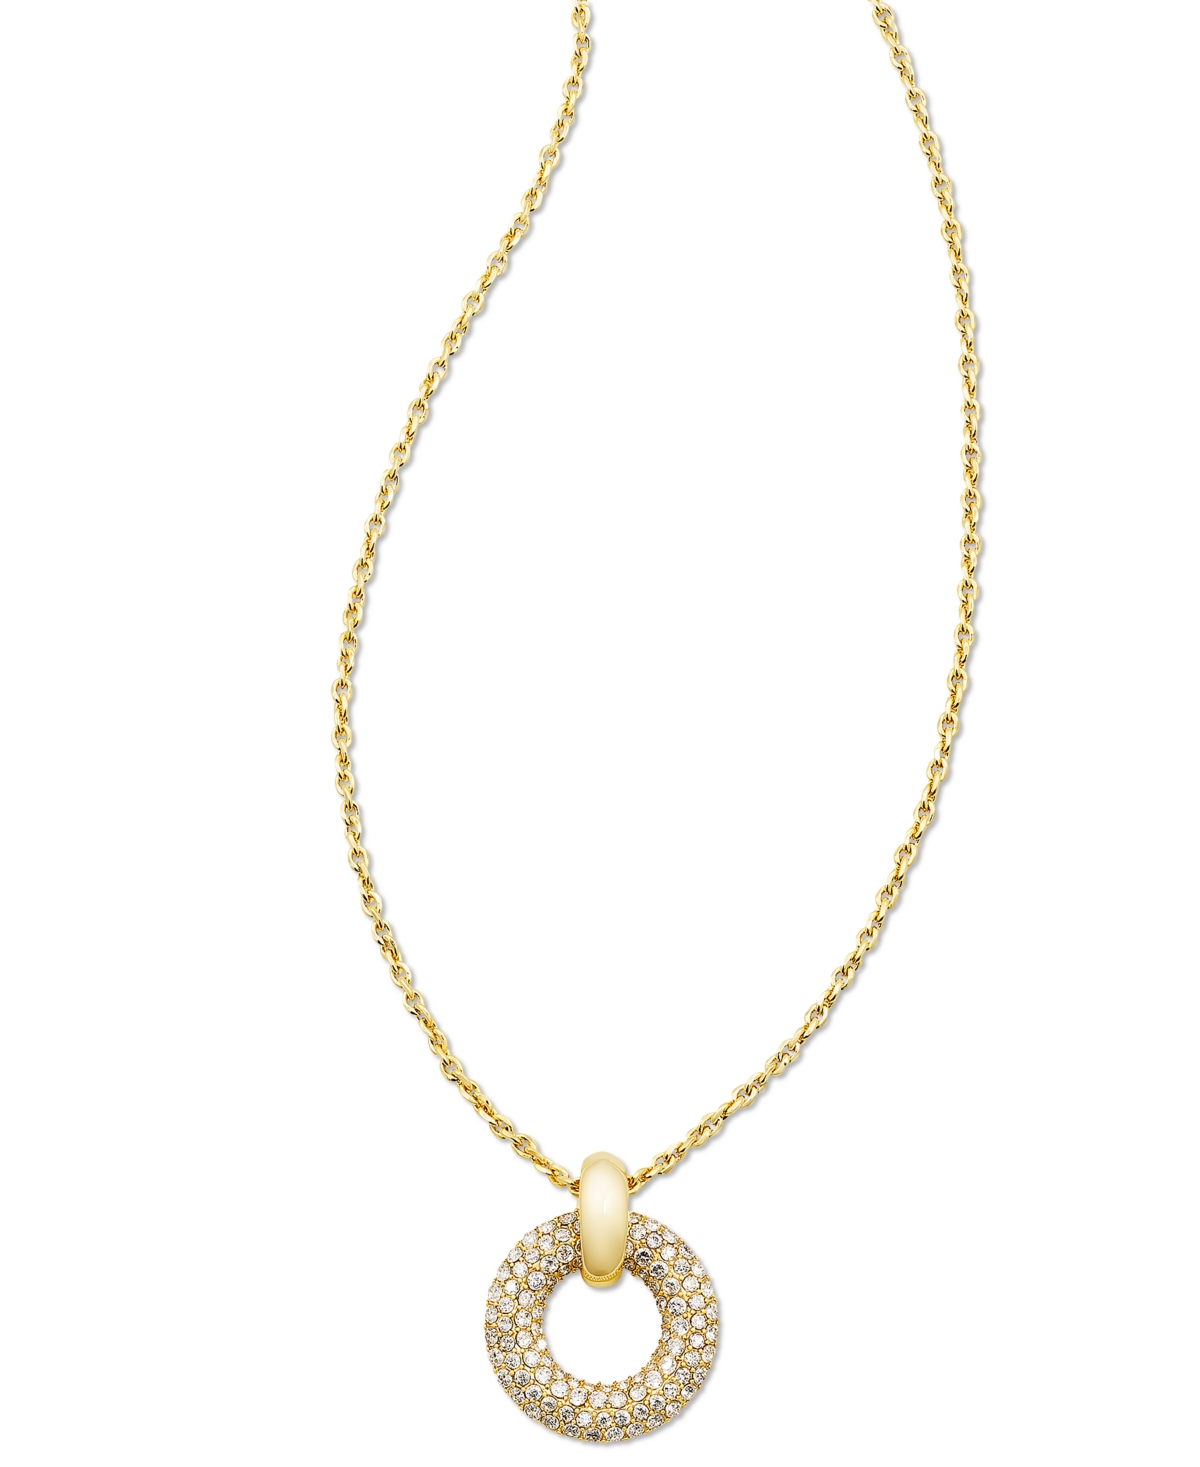 Kendra Scott Mikki Ombre Pave Short Pendant Necklace In 14k Gold Plated, 19 In Gold/white Crystal